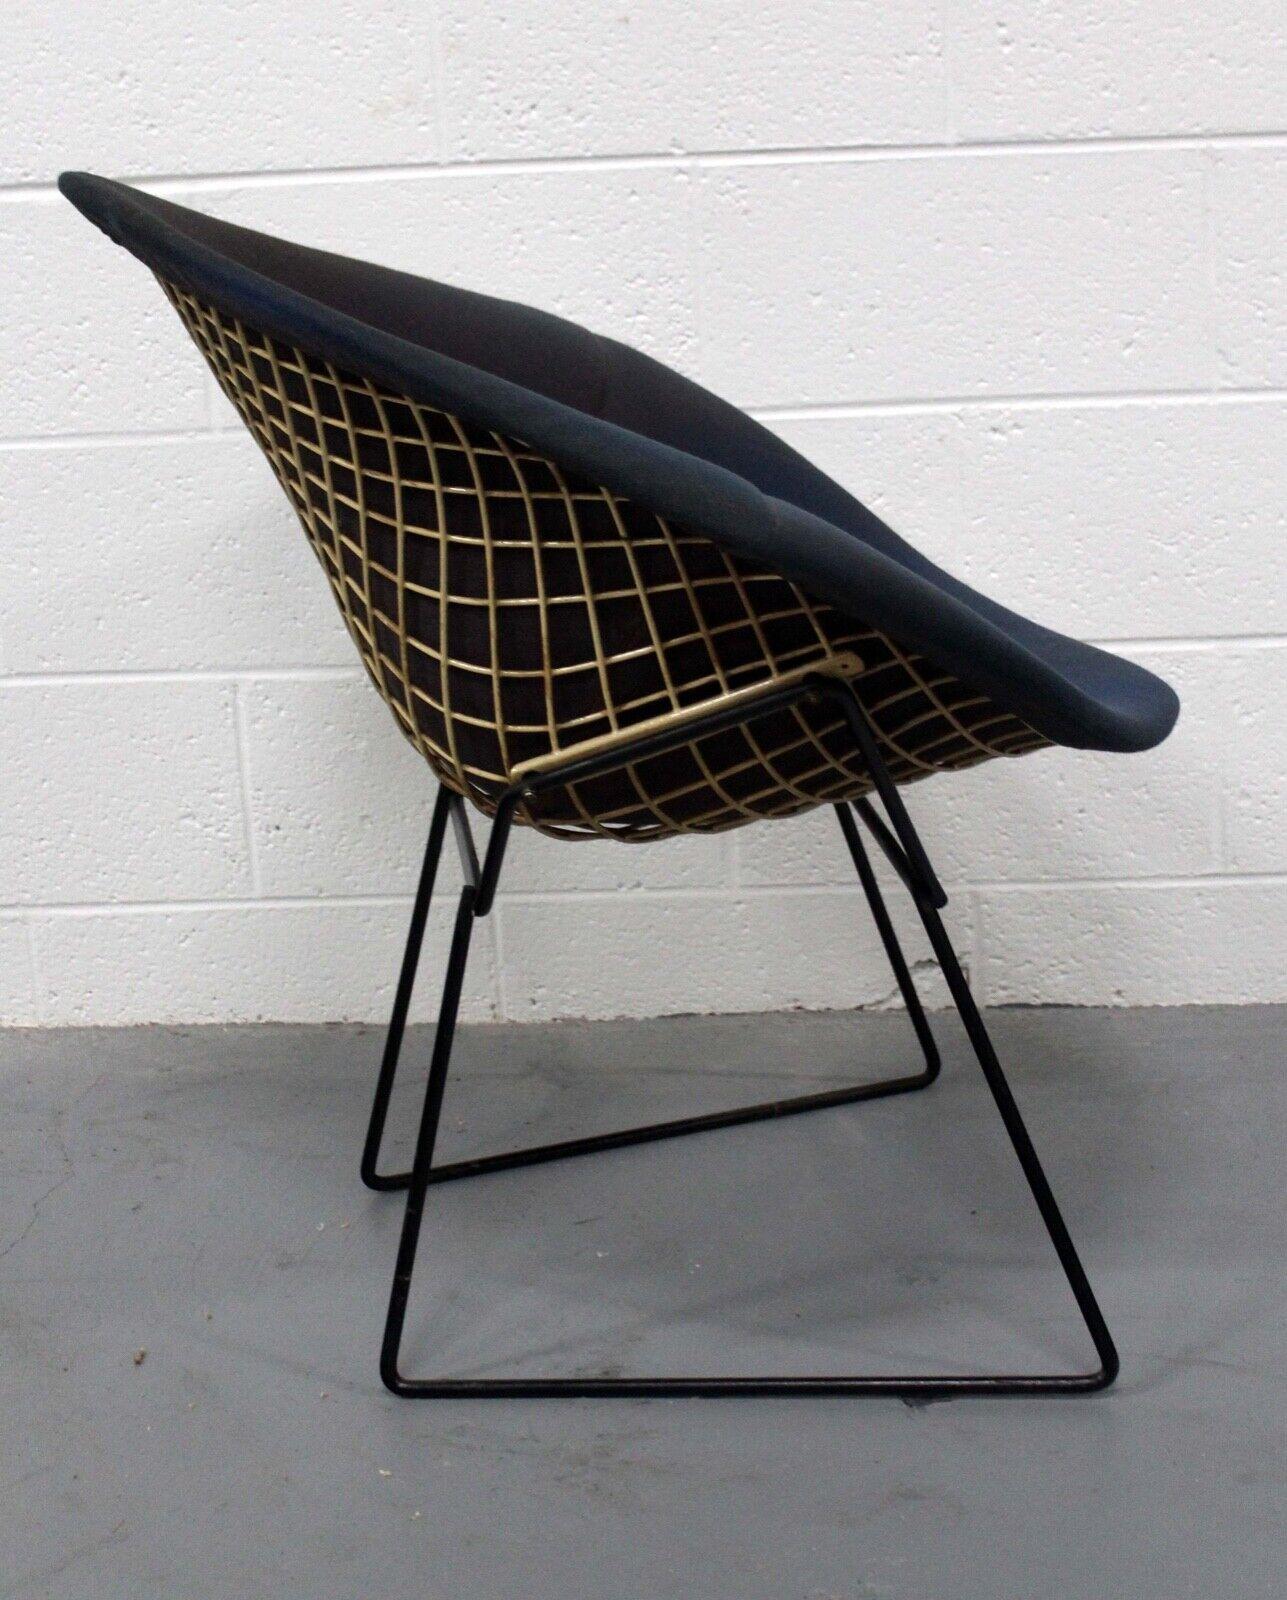 For your consideration is this vintage iconic Harry Bertoia for Knoll Diamond Wire Chair with the original full slip cover. Needs to be reupholstered. Full disclosure it came from a smokers estate.
   